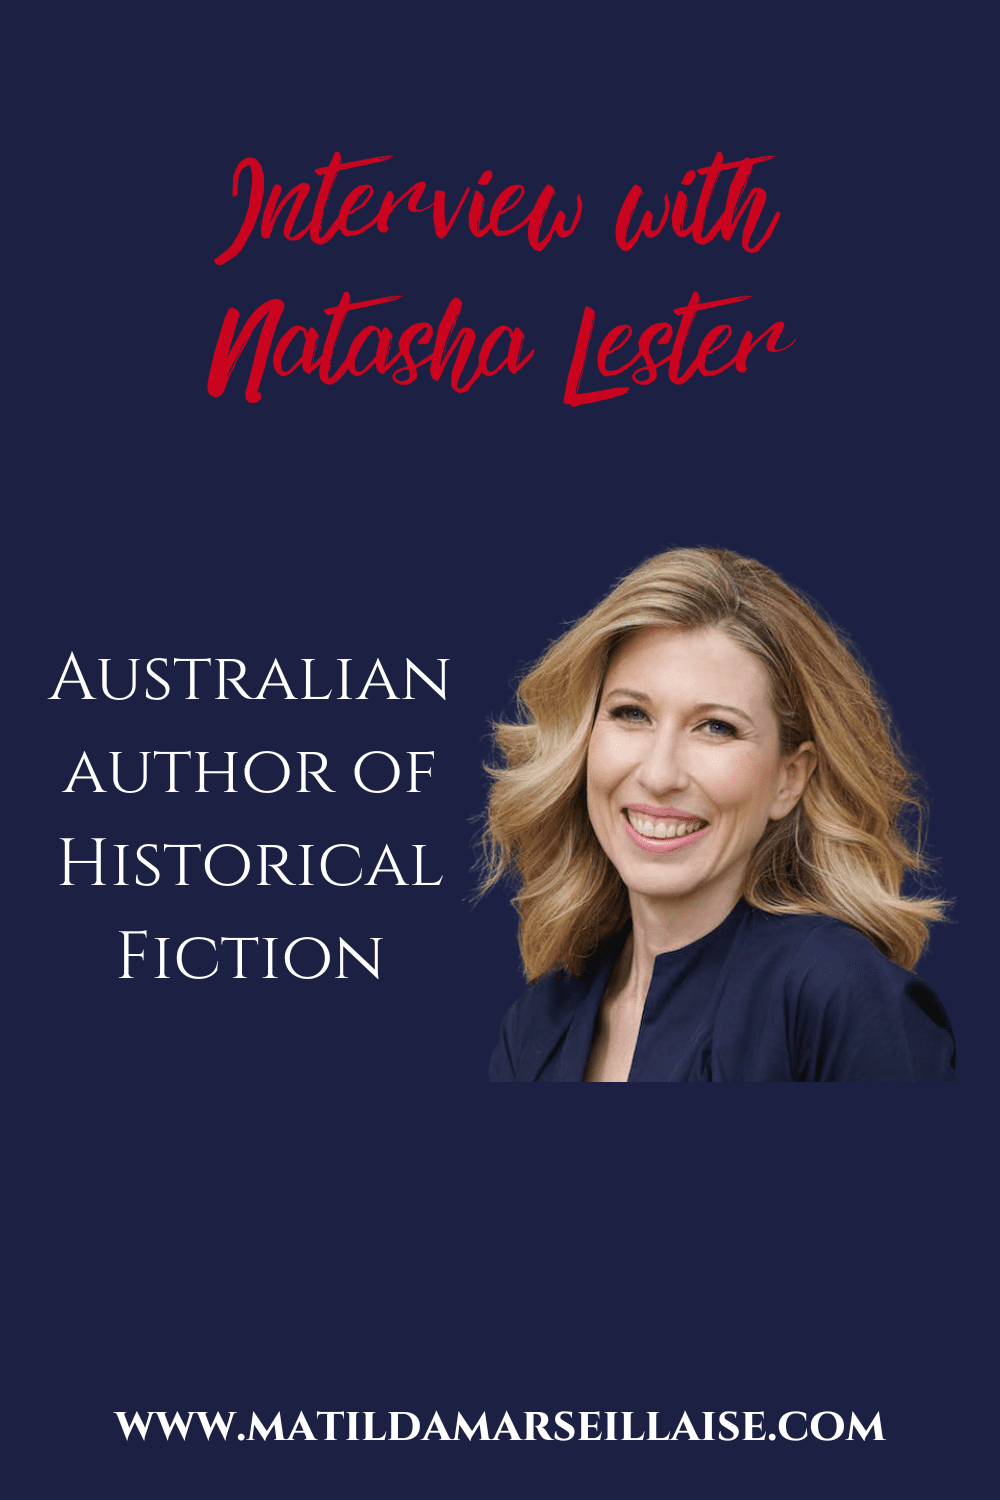 Natasha Lester talks about researching French archives and her latest book “The Disappearance of Astrid Bricard’